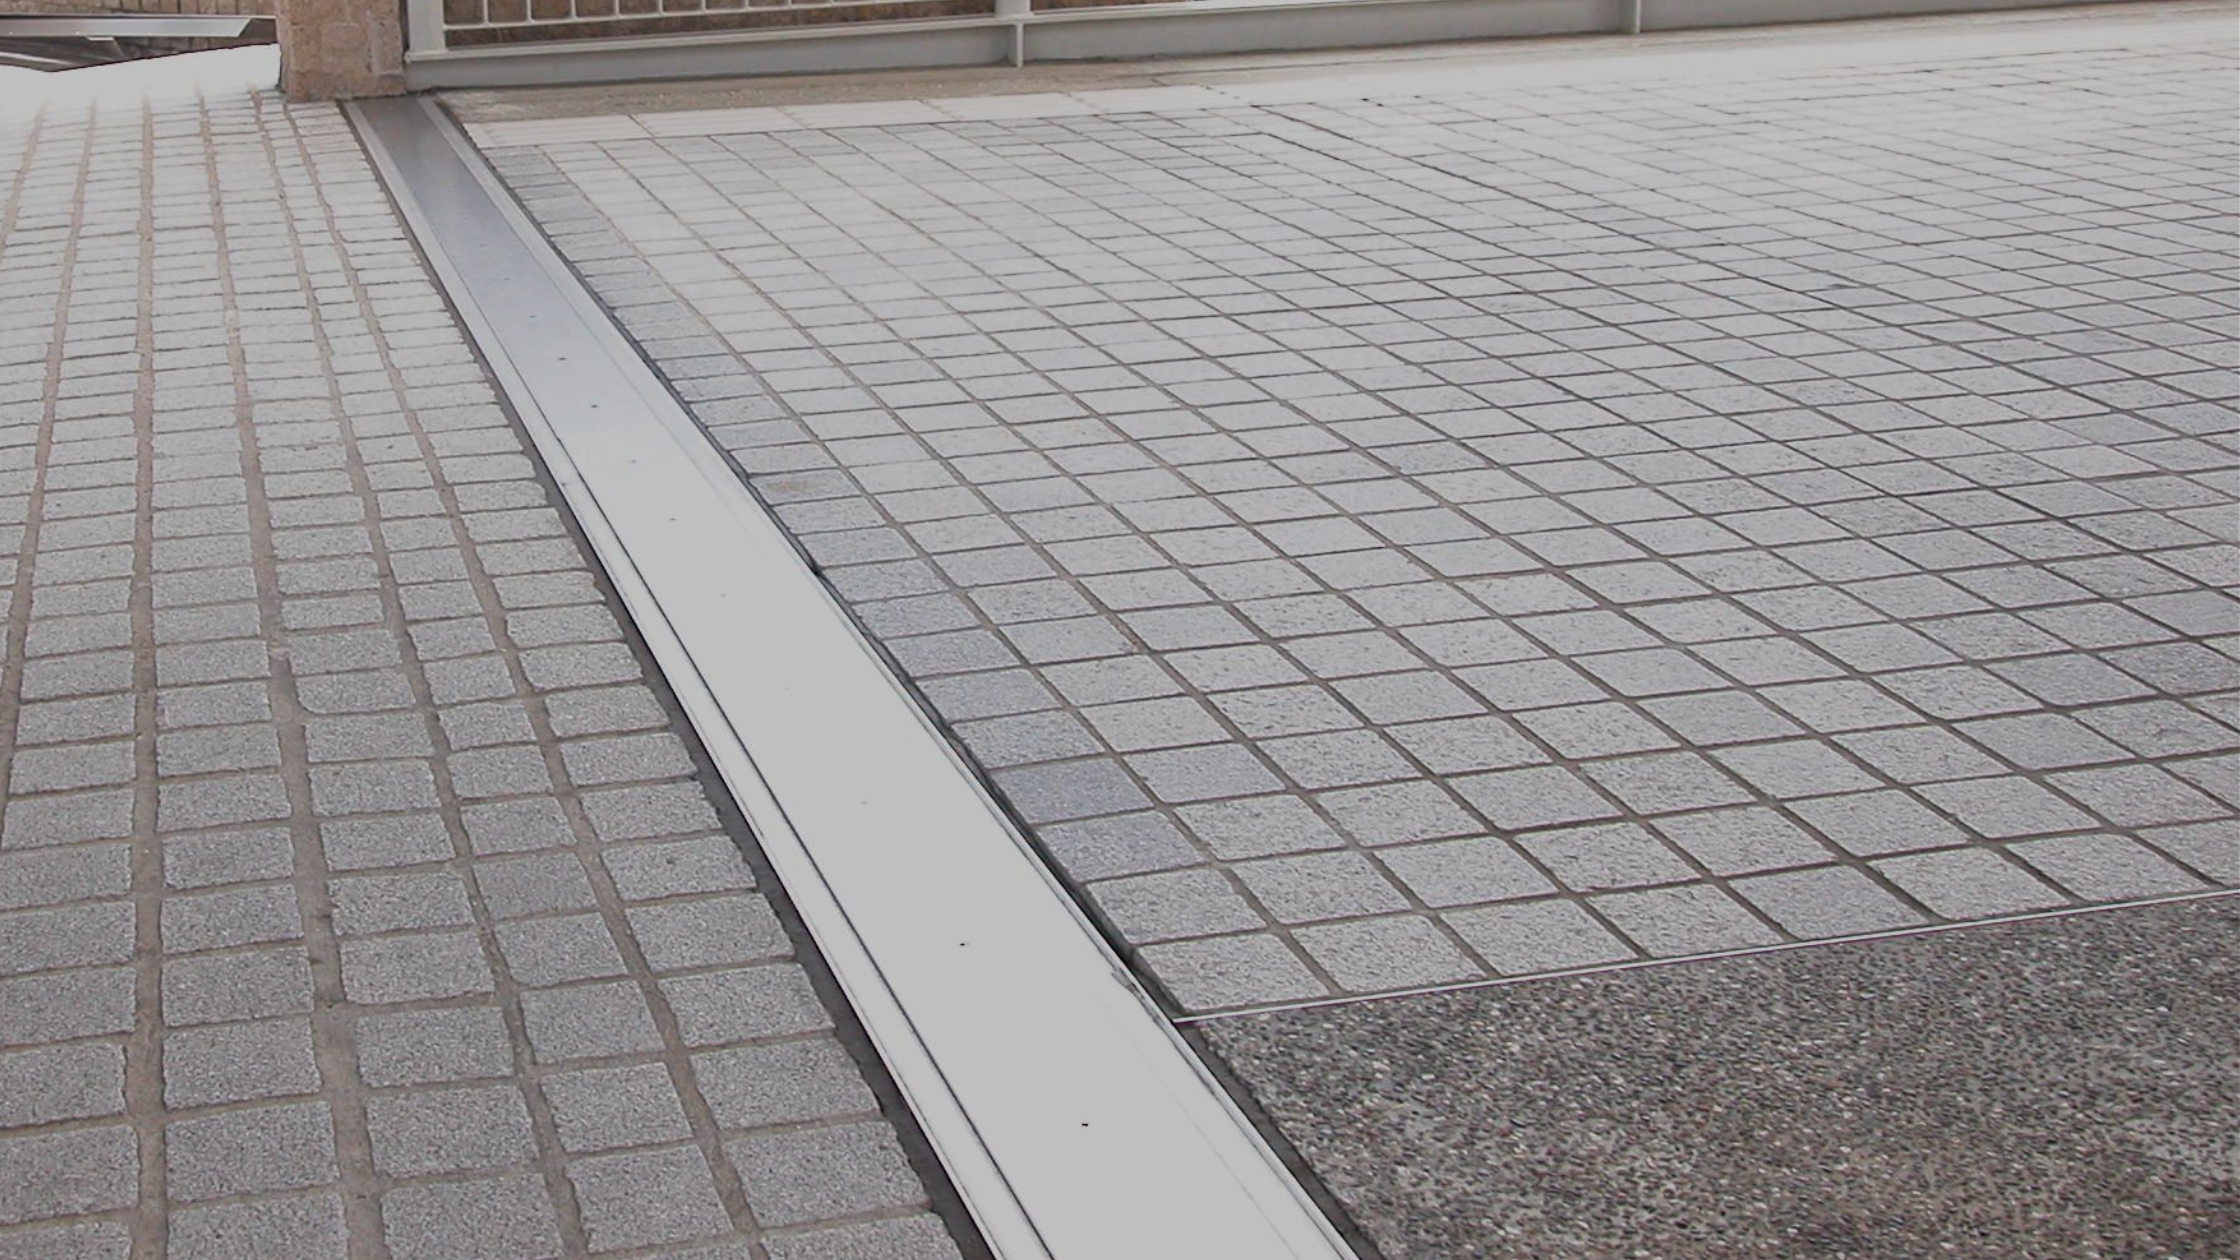 Expansion Joints - The Invisible Heroes of your Building